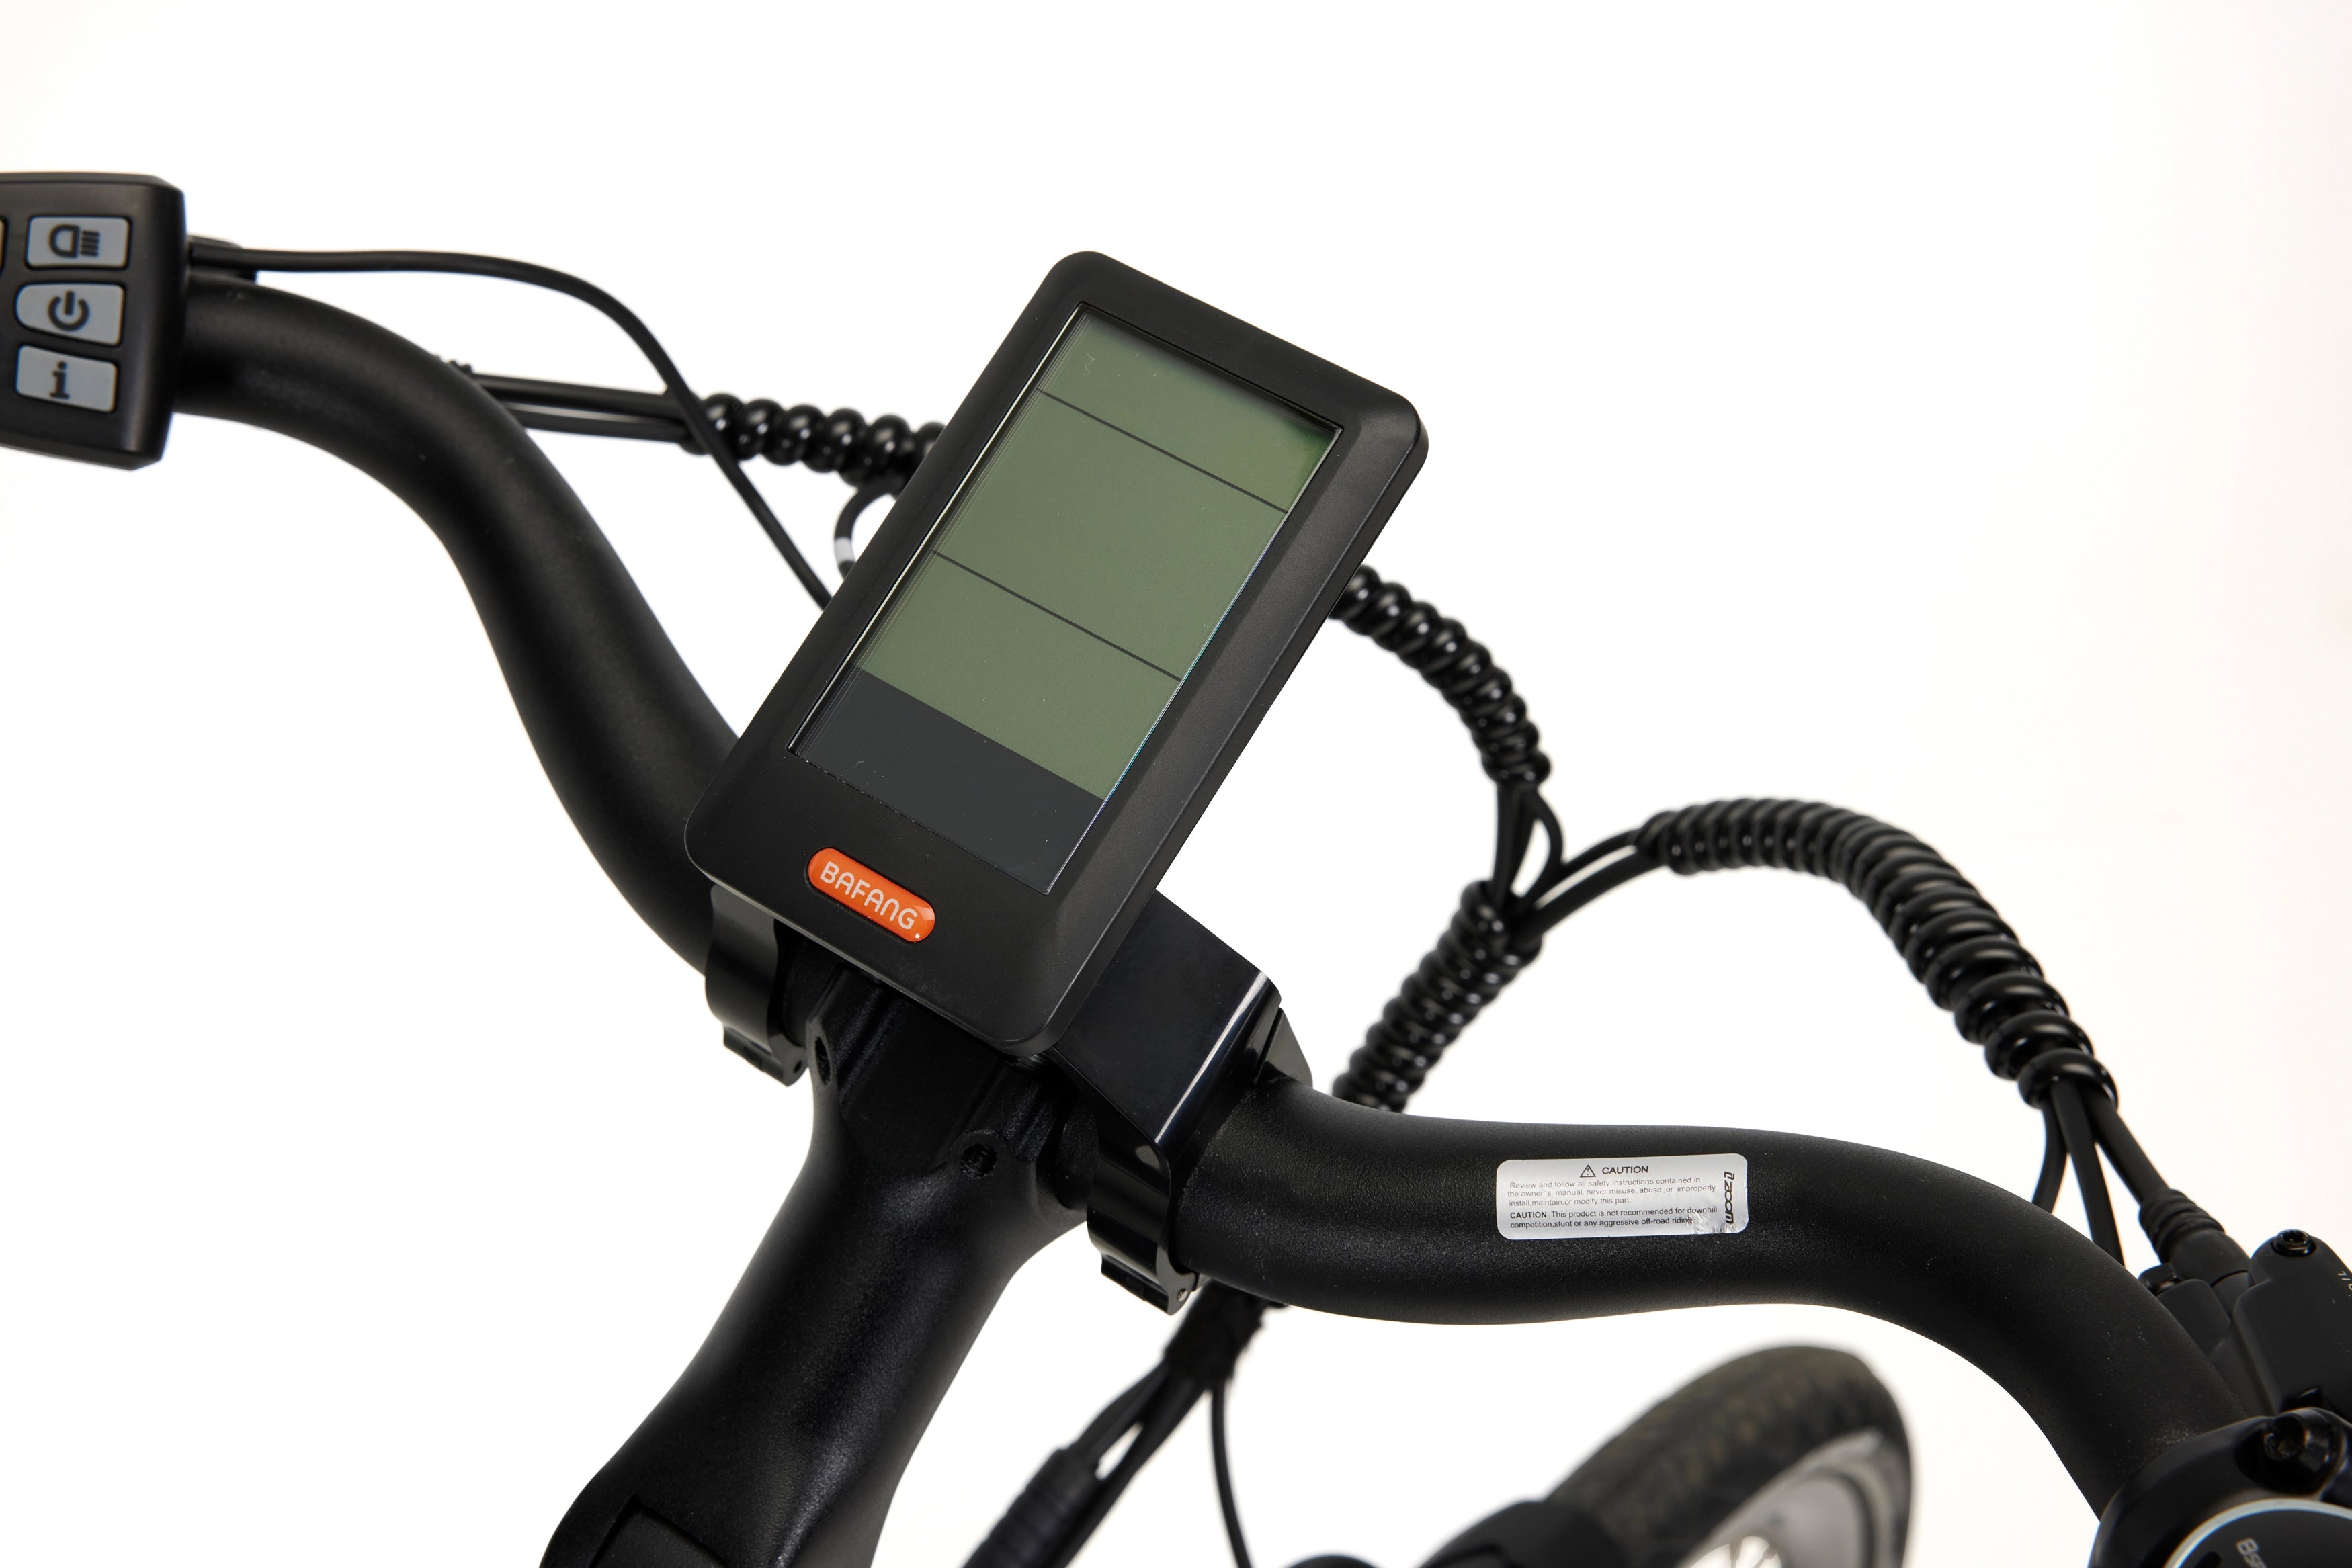 A close-up photo of the electronic display on the Veloci Solid electric bike. This is a Bafang display screen which shows the level of electric assist as well as the speed being travelled. 